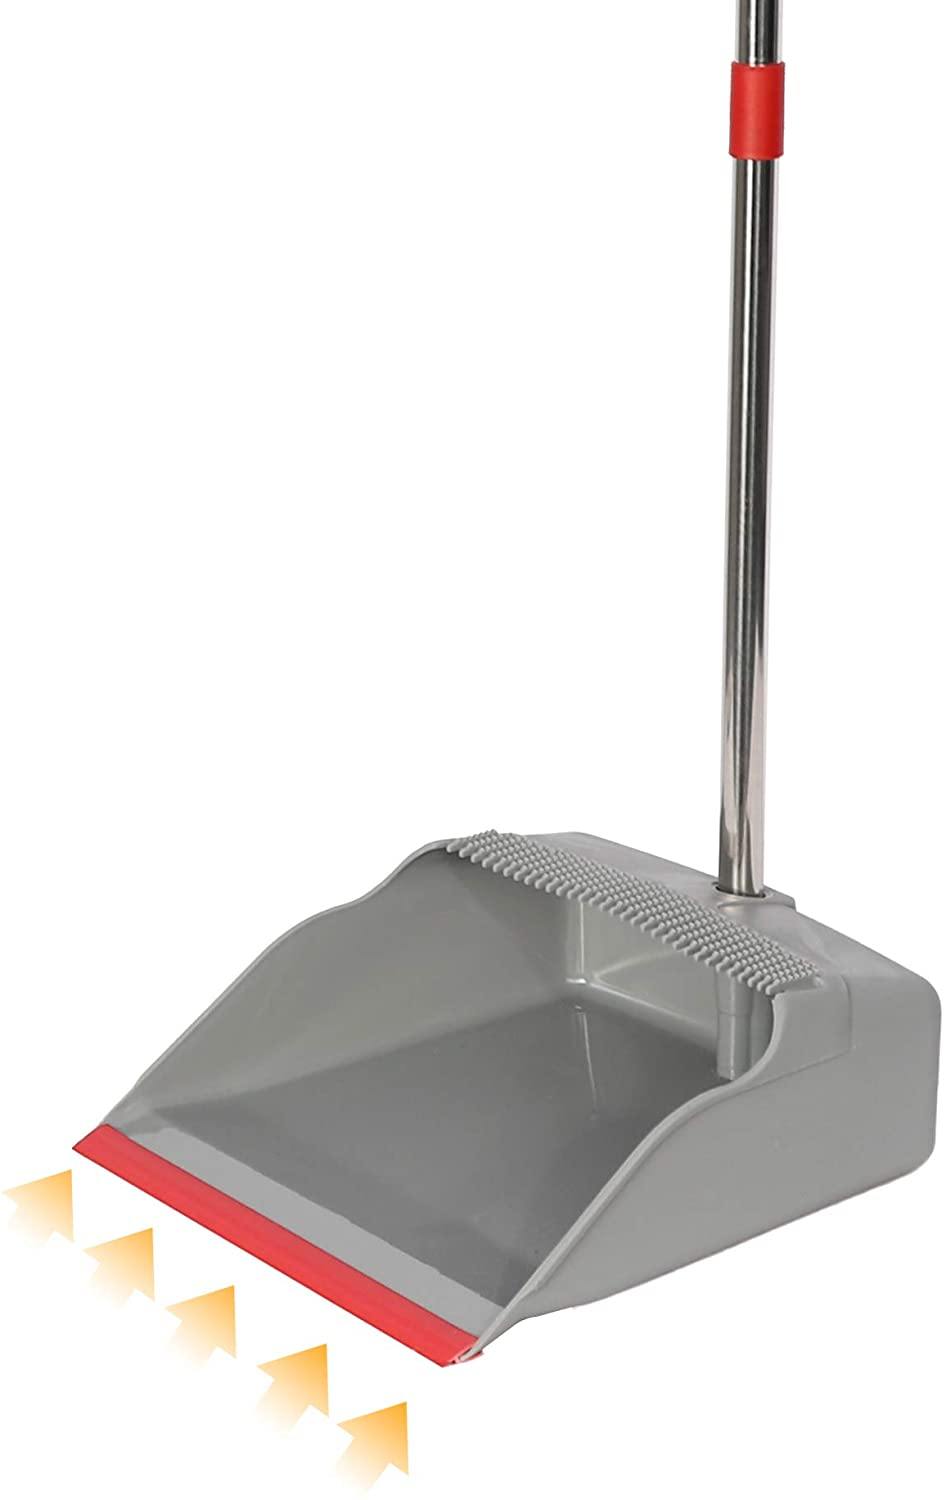 Broom and Dustpan Set Long Handle Lightweight and Robust Sweep Set Easy Assembly for Pet Hair Dirty Corners, Home Office, Grey + Red - Bosonshop